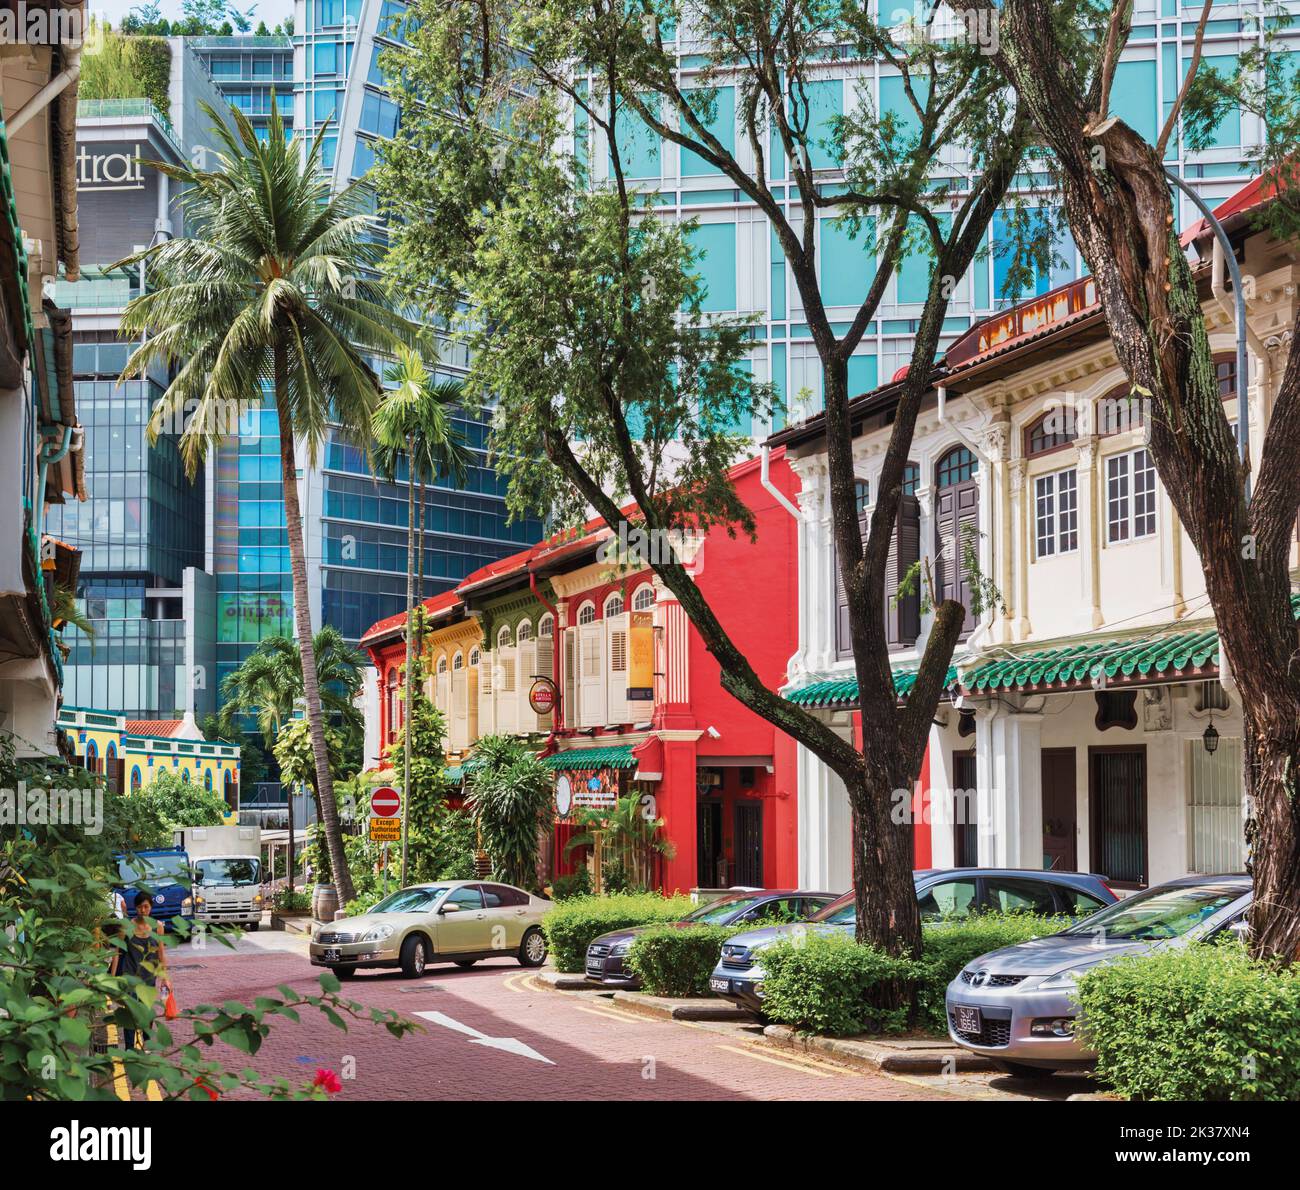 Properties in Emerald Hill Road, Republic of Singapore.  Emerald Hill lies close to Orchard Road one of Singapore's main thoroughfares.  It features p Stock Photo